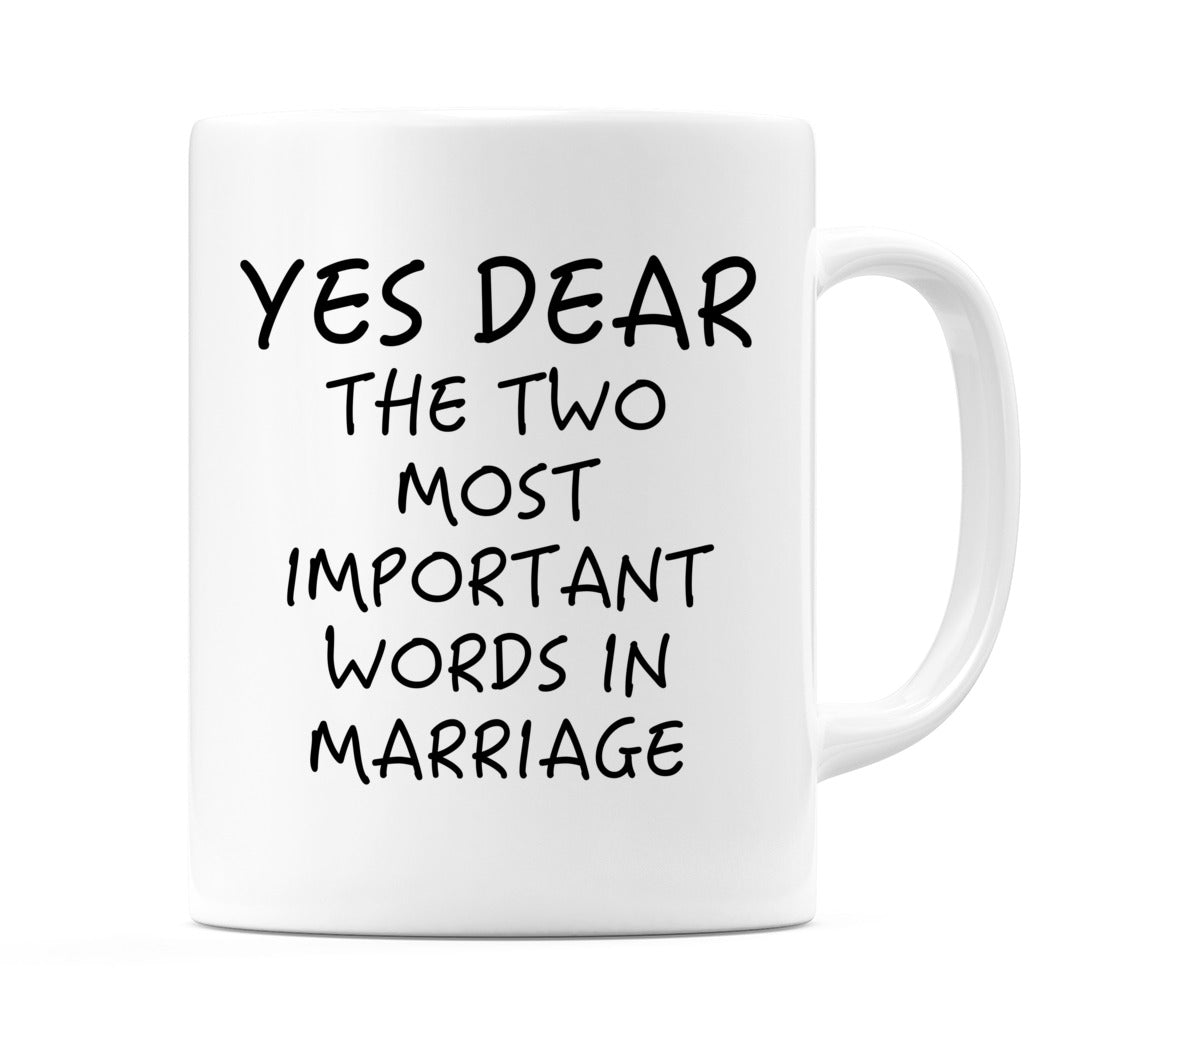 Yes Dear The Two Most Important Words in Marriage Mug